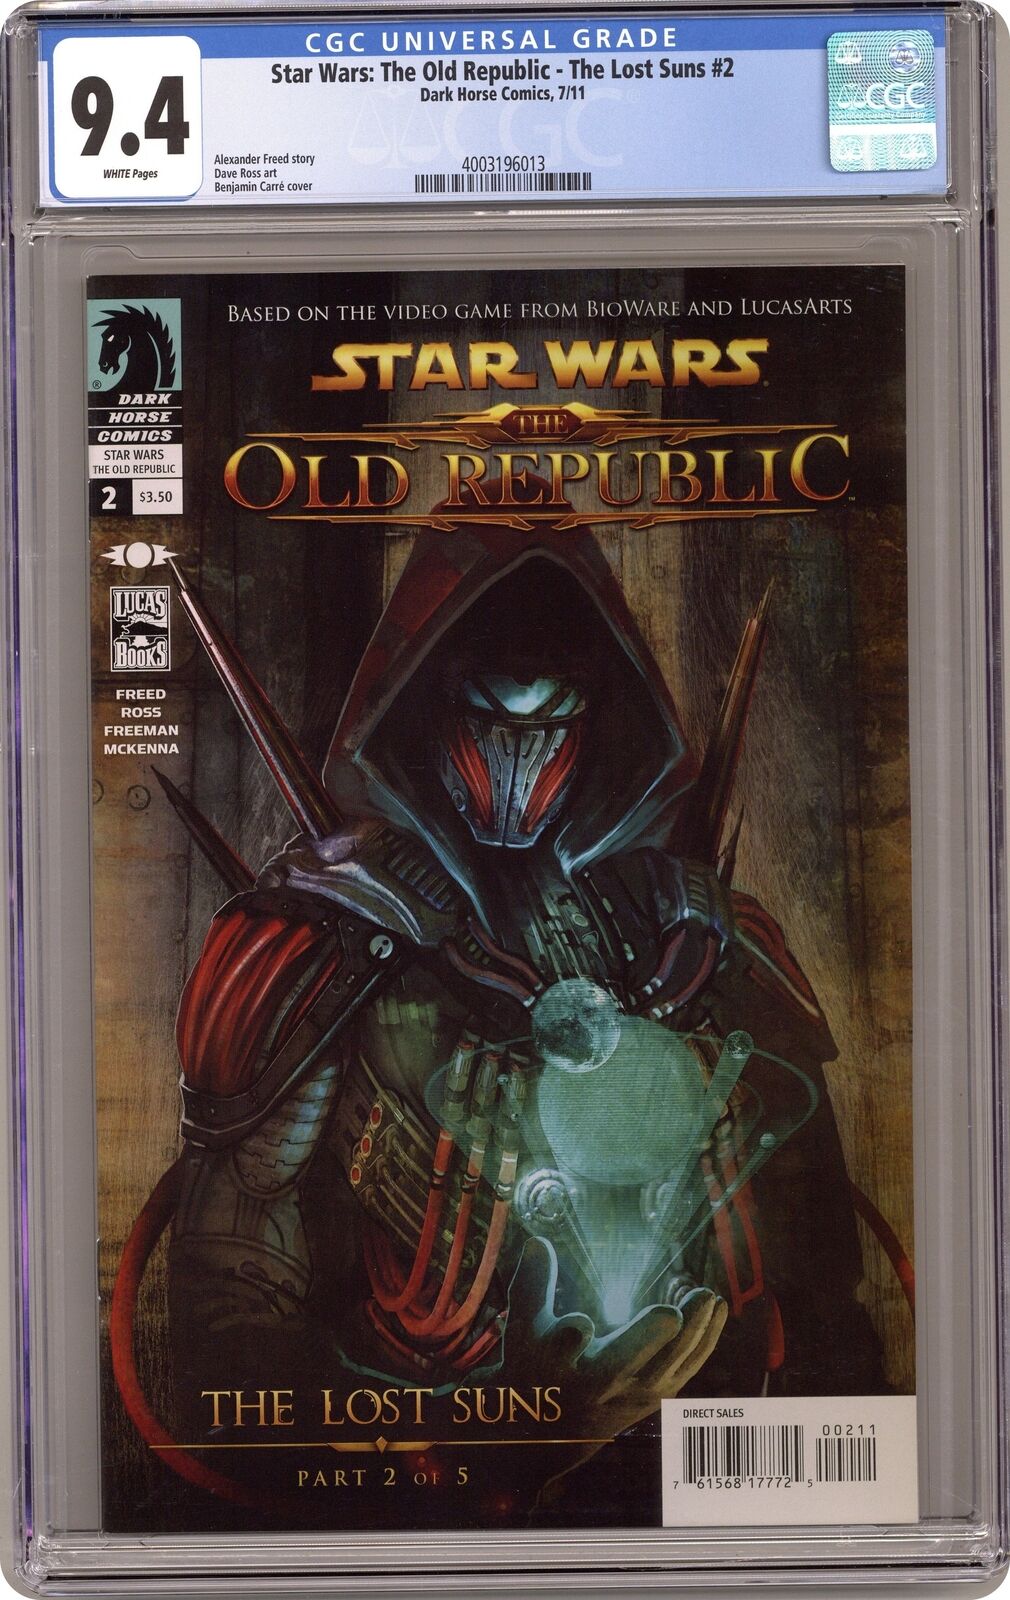 Star Wars The Old Republic The Lost Suns #2 CGC 9.4 2011 4003196013